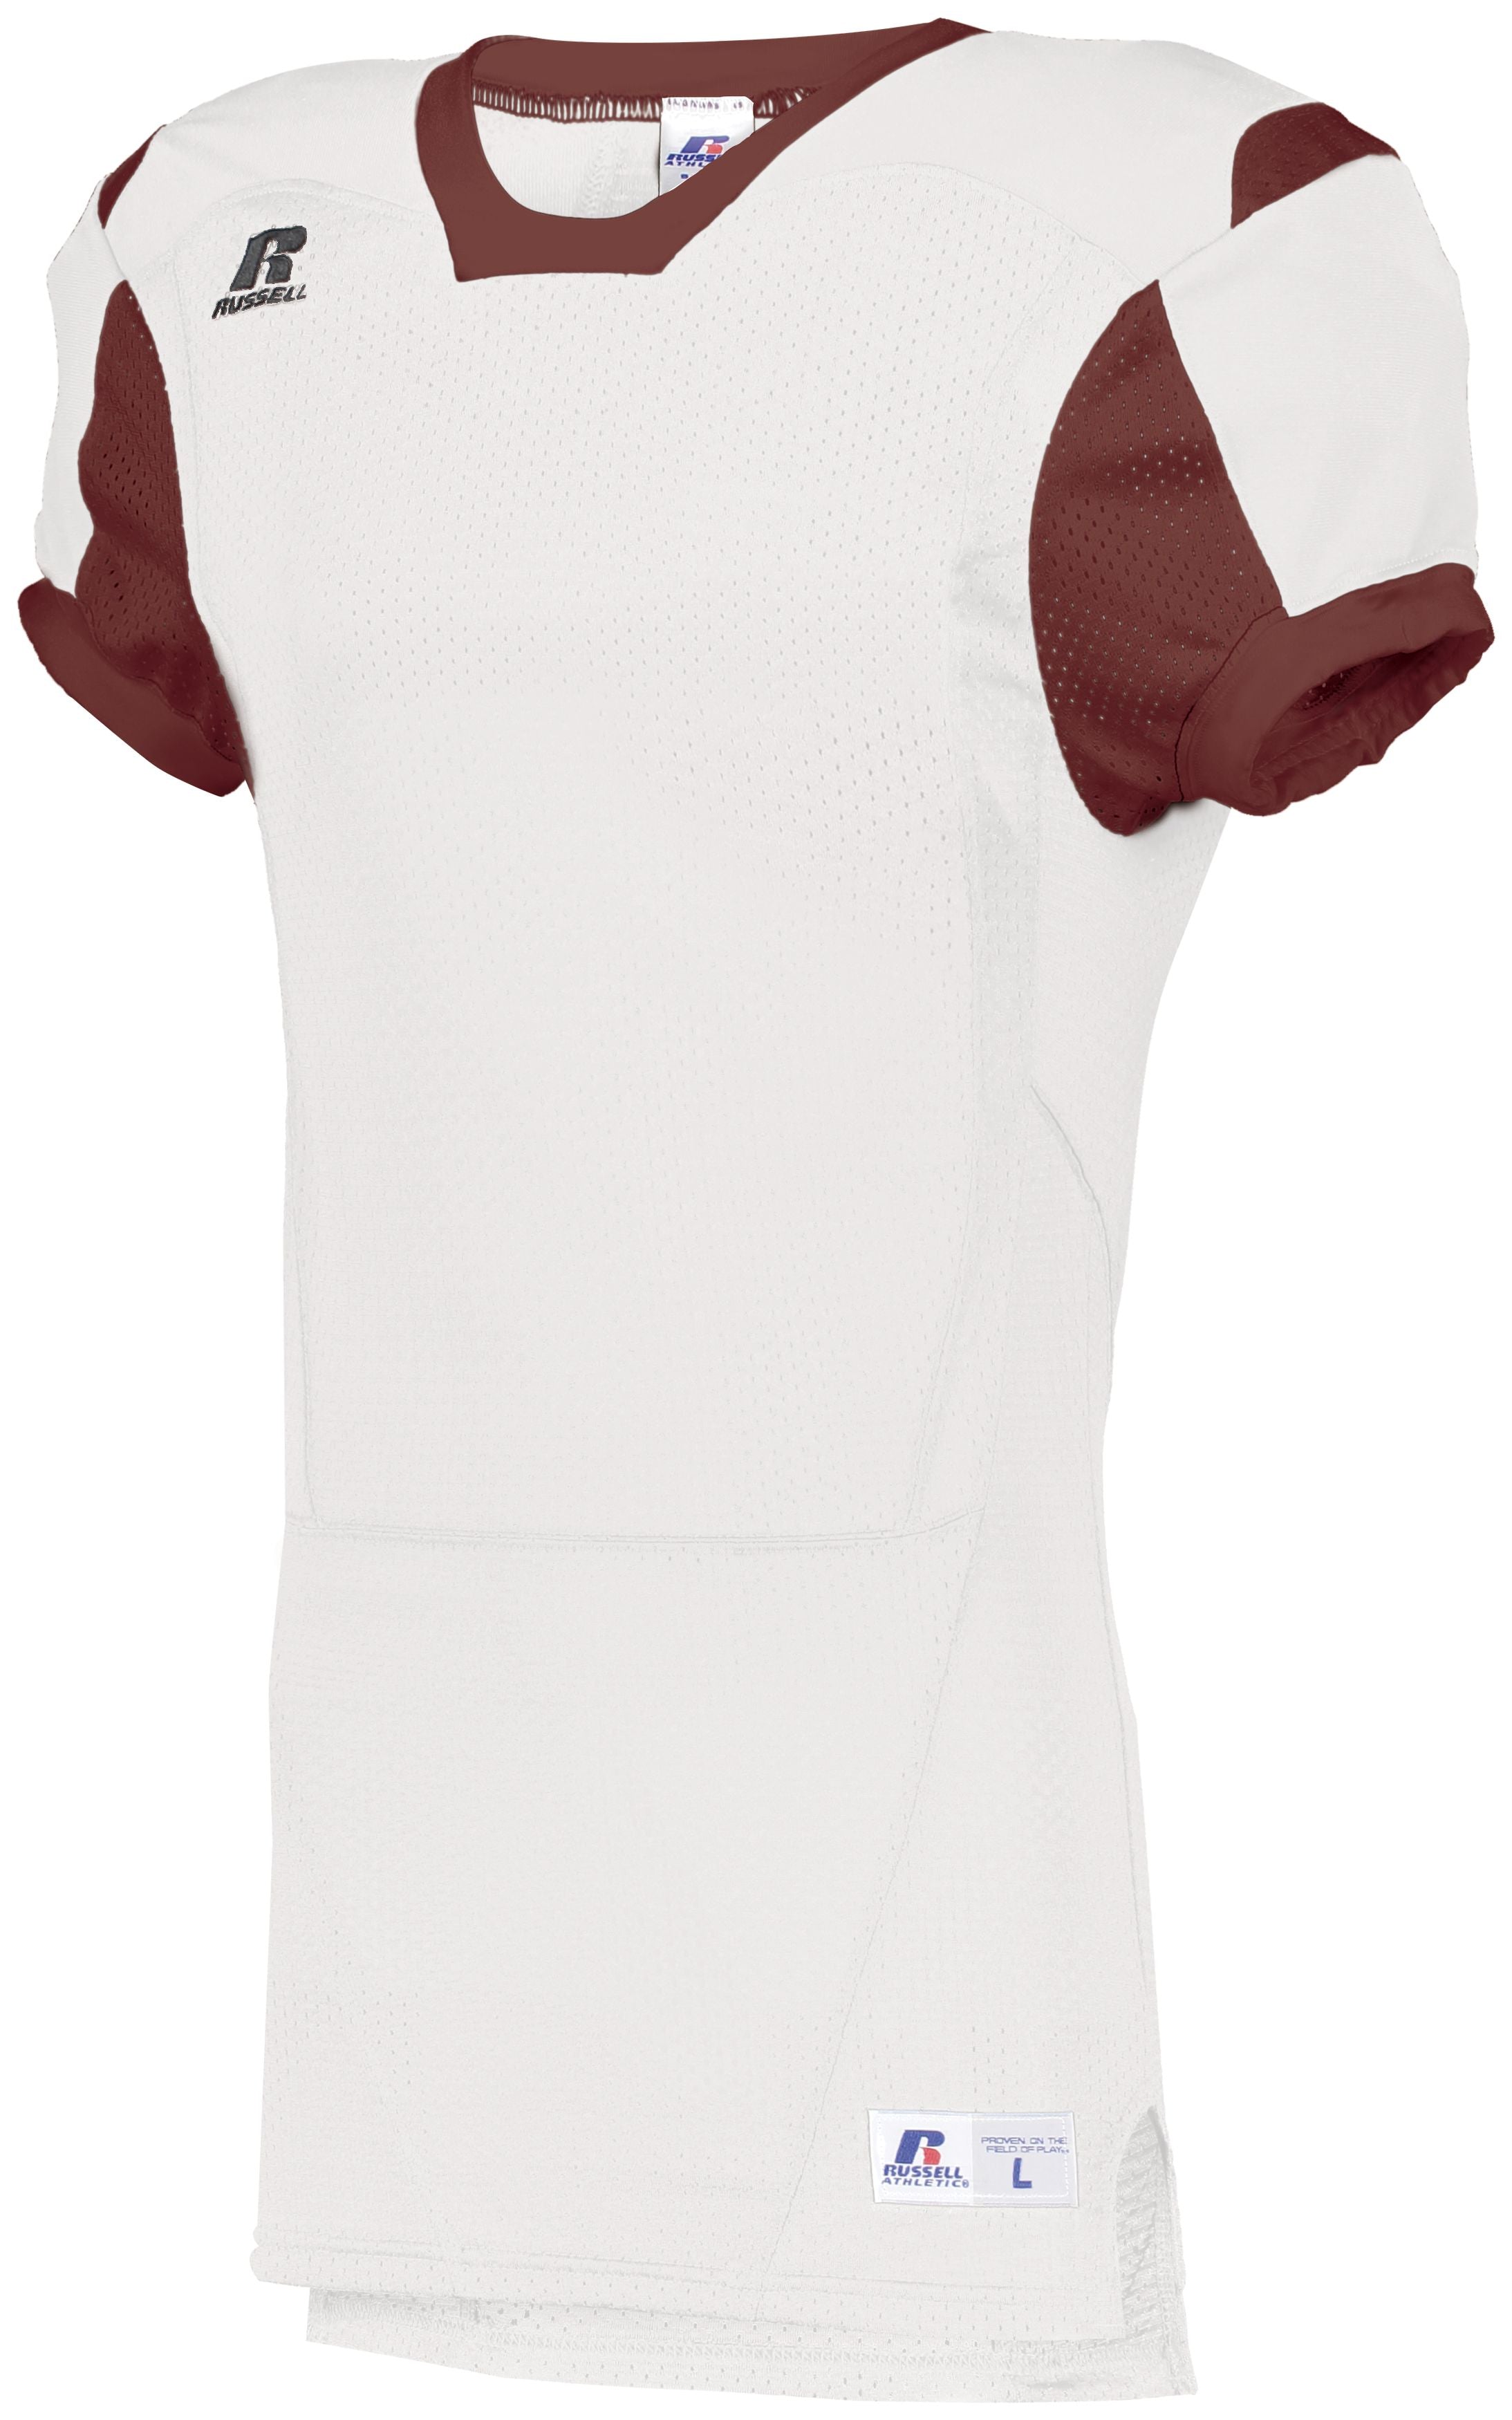 Russell Athletic Youth Color Block Game Jersey in White/Cardinal  -Part of the Youth, Youth-Jersey, Football, Russell-Athletic-Products, Shirts, All-Sports, All-Sports-1 product lines at KanaleyCreations.com